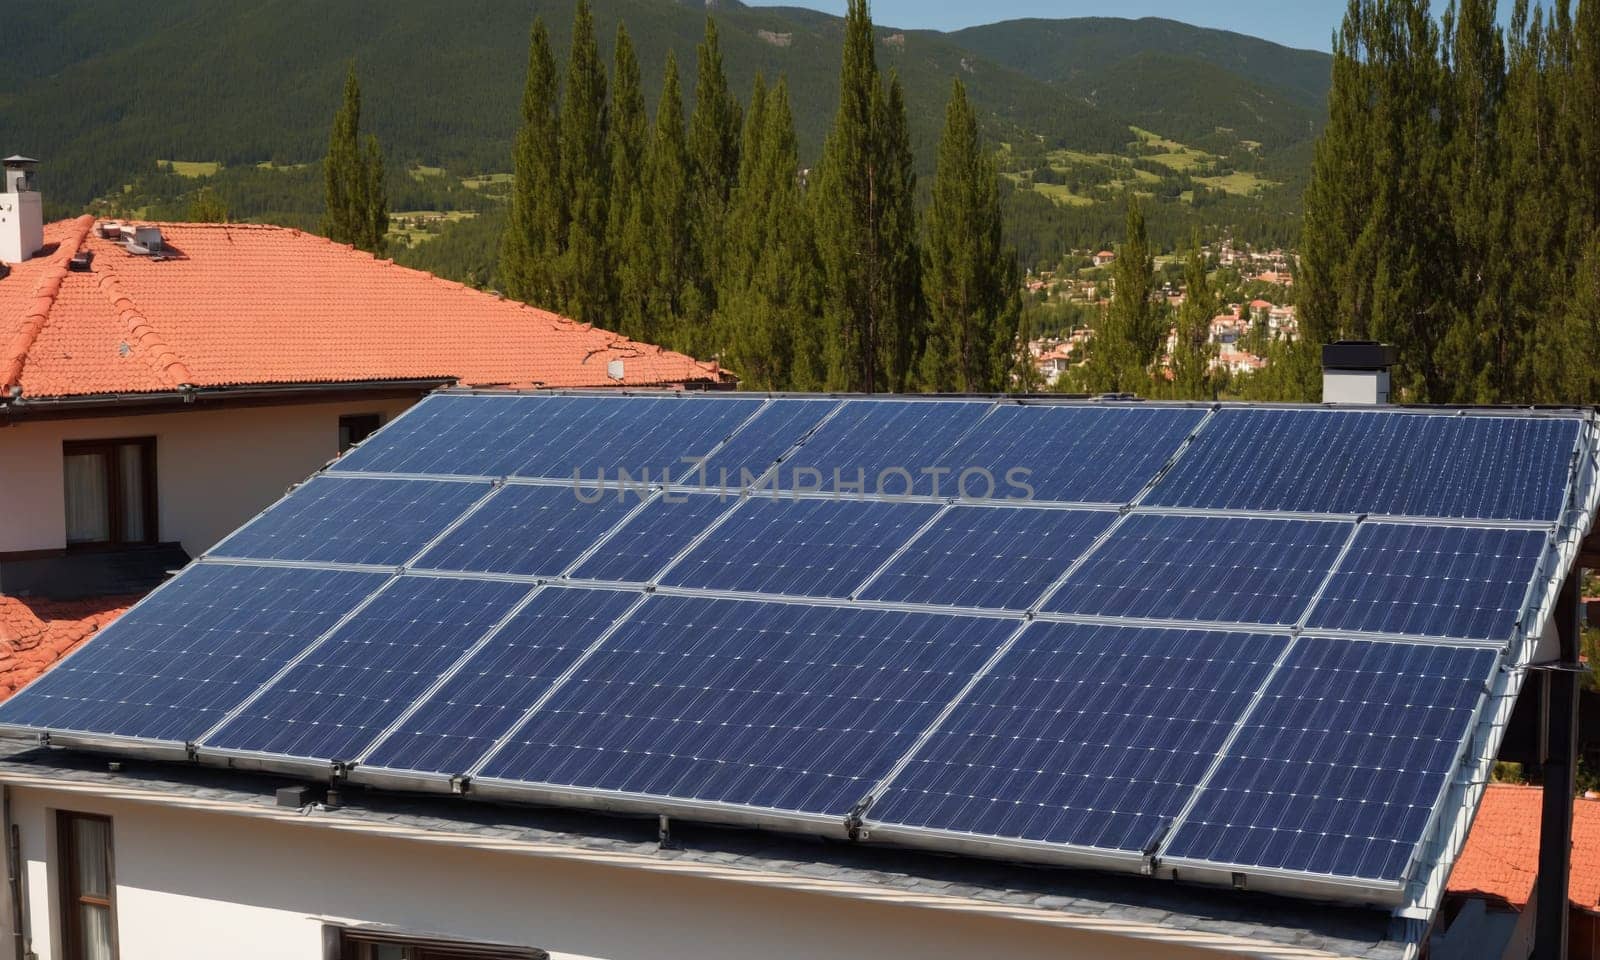 Solar panels installed on the roof of a house in Montenegro